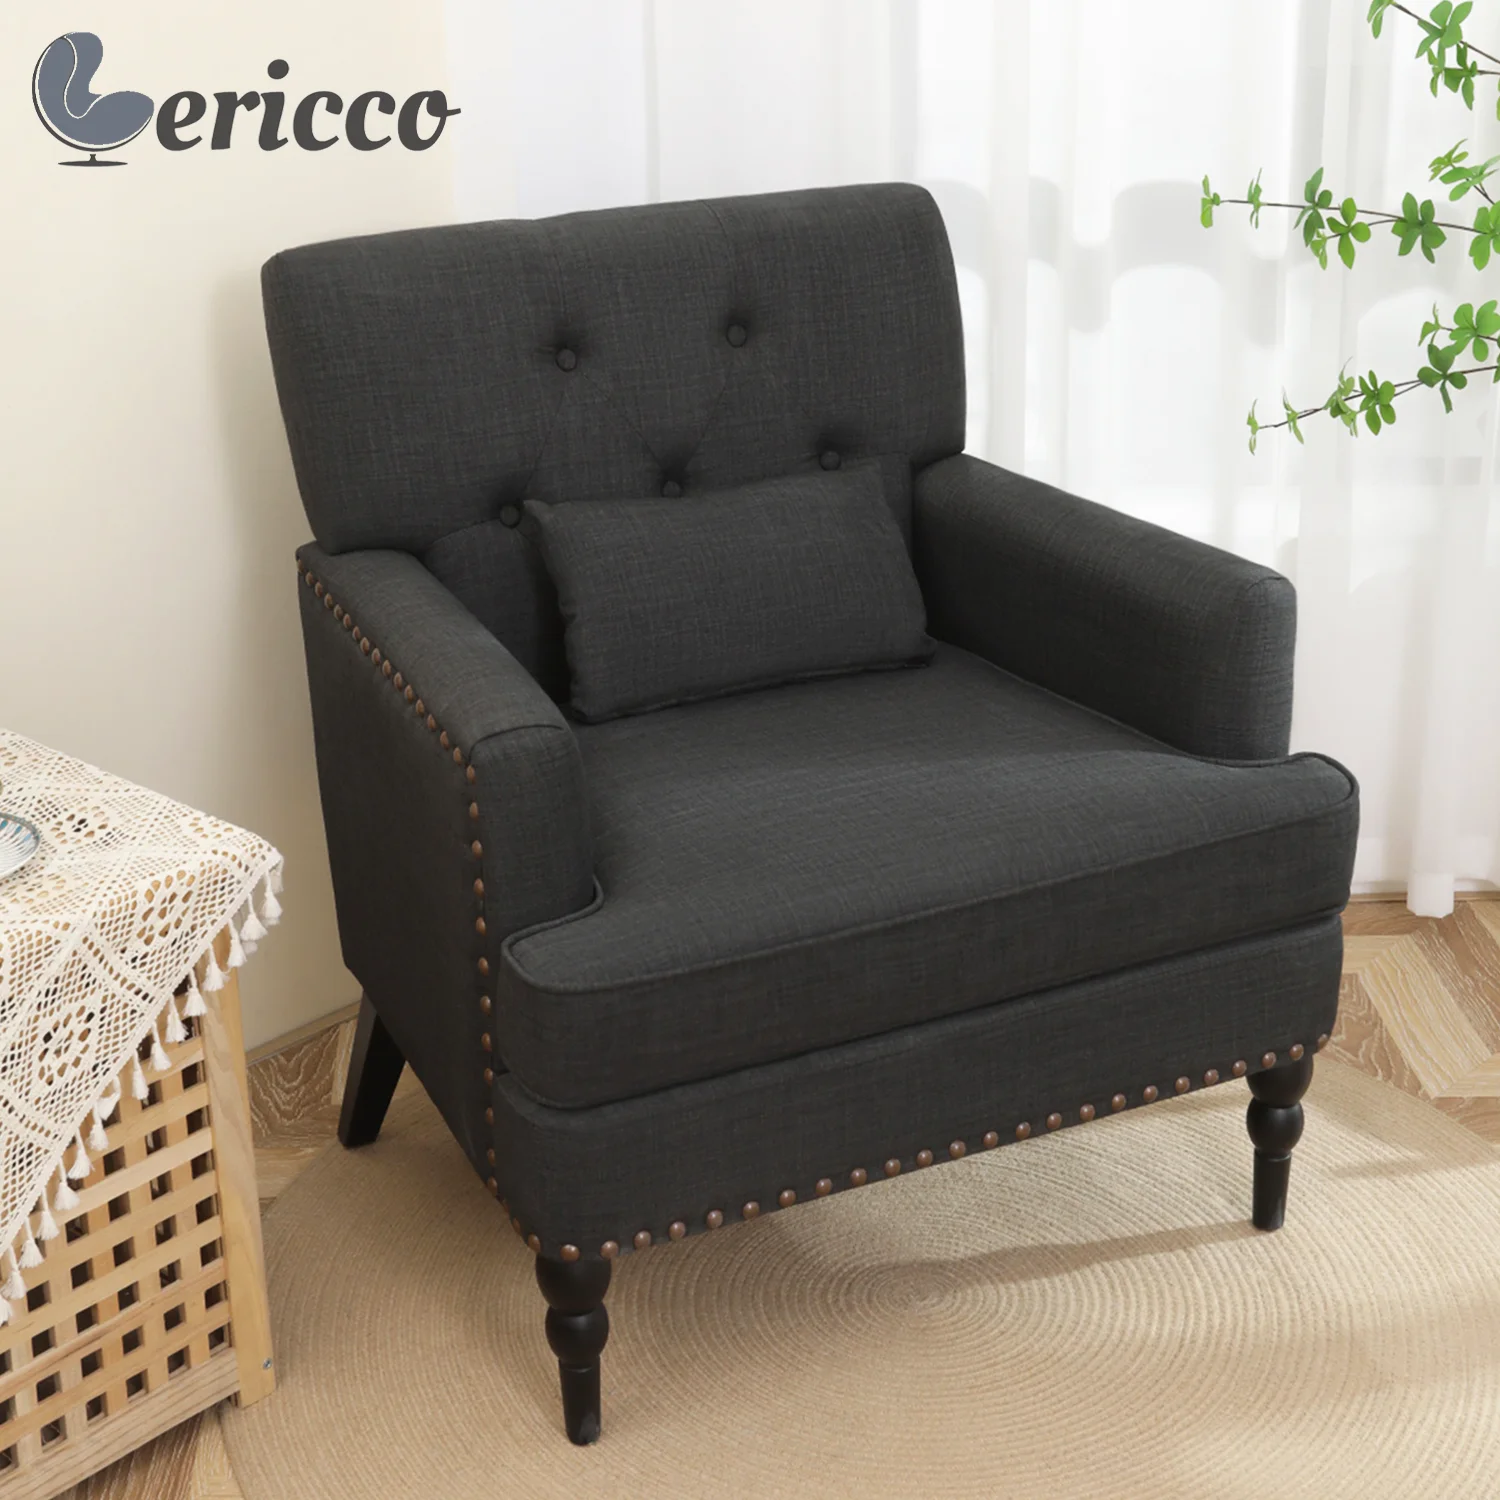 

GERICCO Nordic Chairs Upholstered Club Chair Modern Lounge Sofa Chair with Pillow Button Tufted Rivet Comfy Armchair for Bedroom